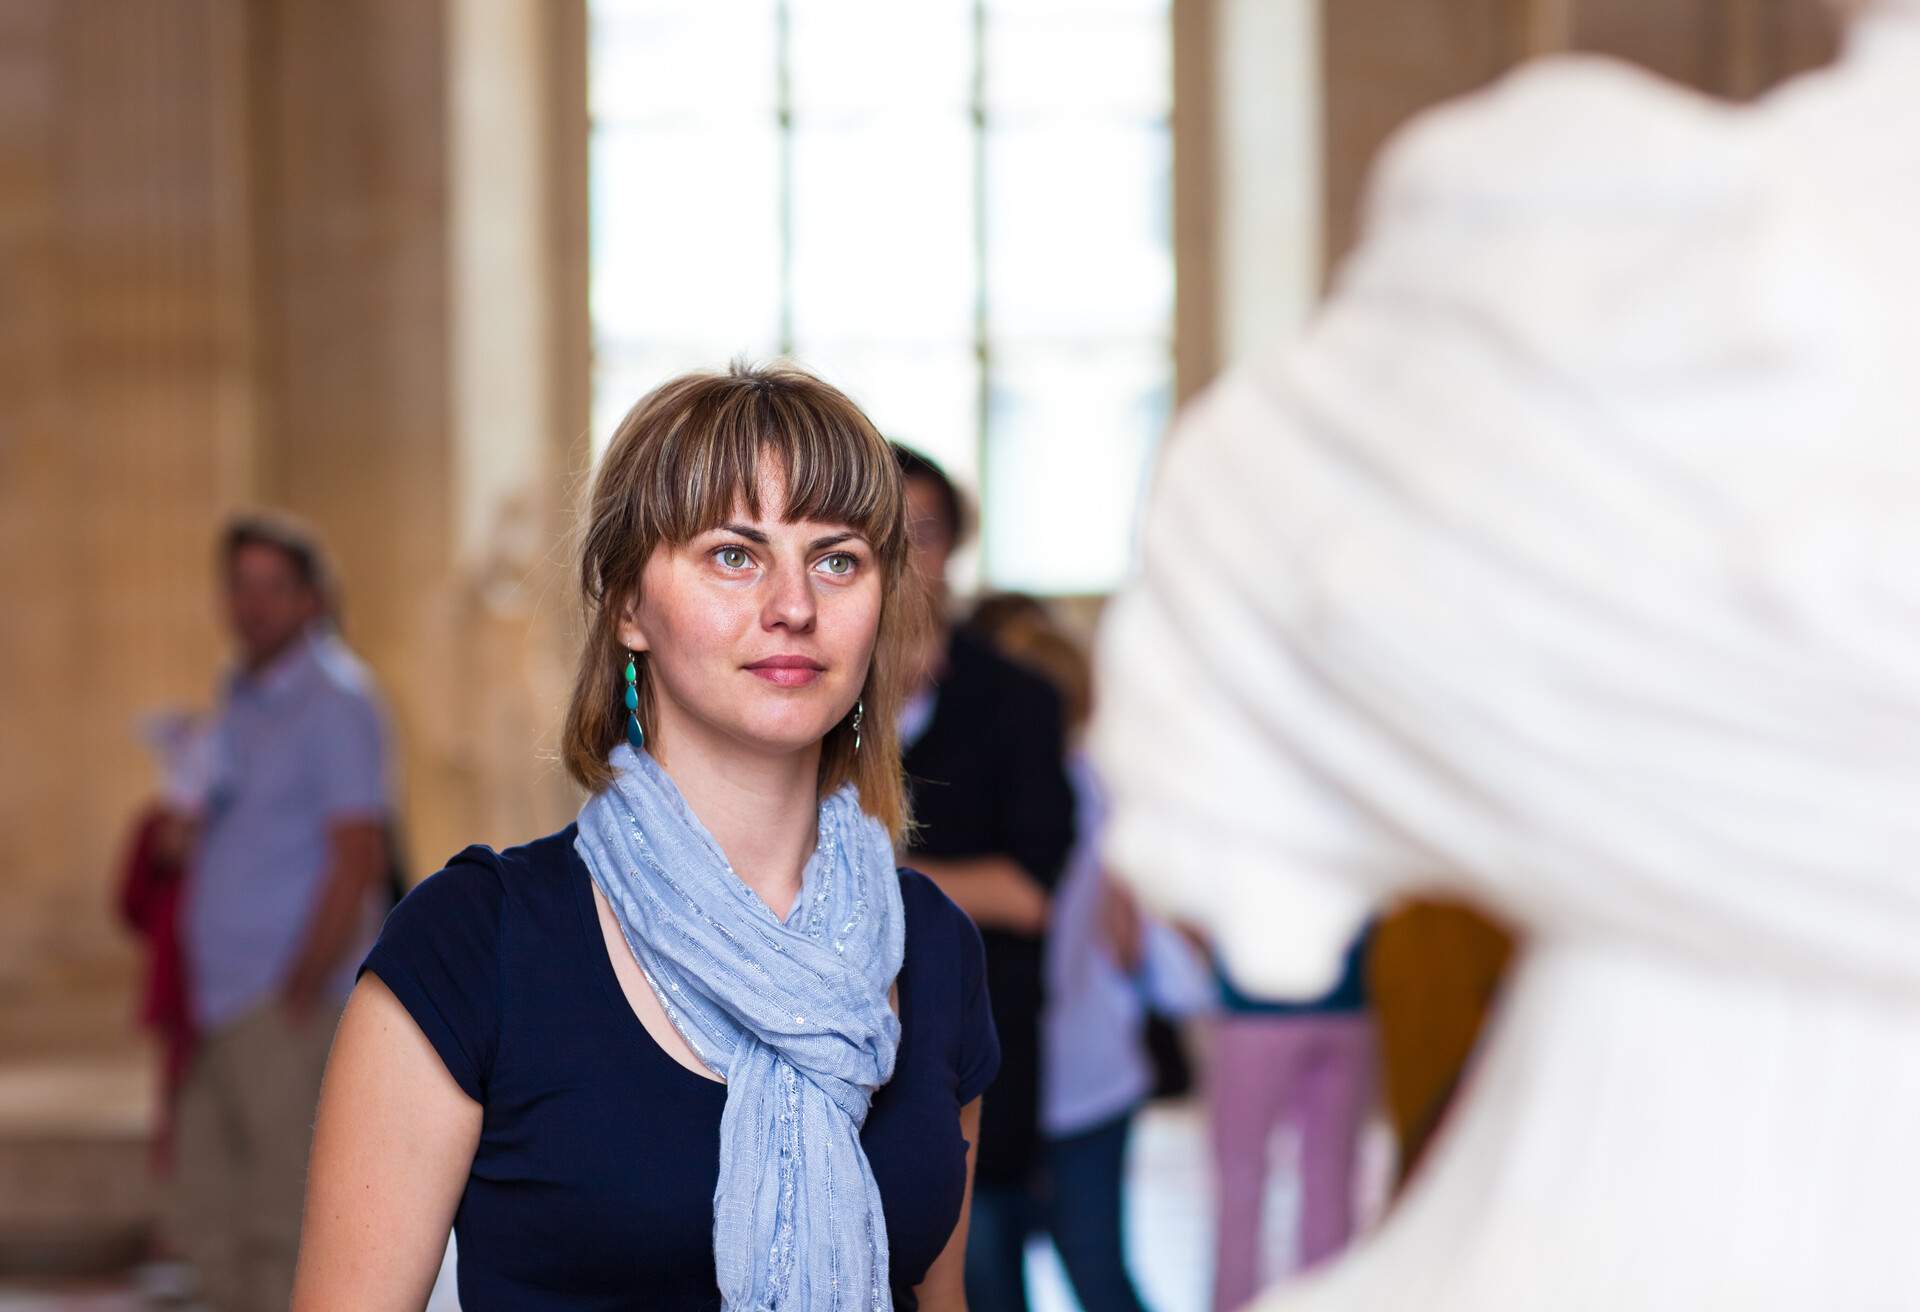 A woman wearing a light blue scarf and dark blue blouse admires the exquisite craftsmanship of a fine art statue, fully immersed in the museum experience.